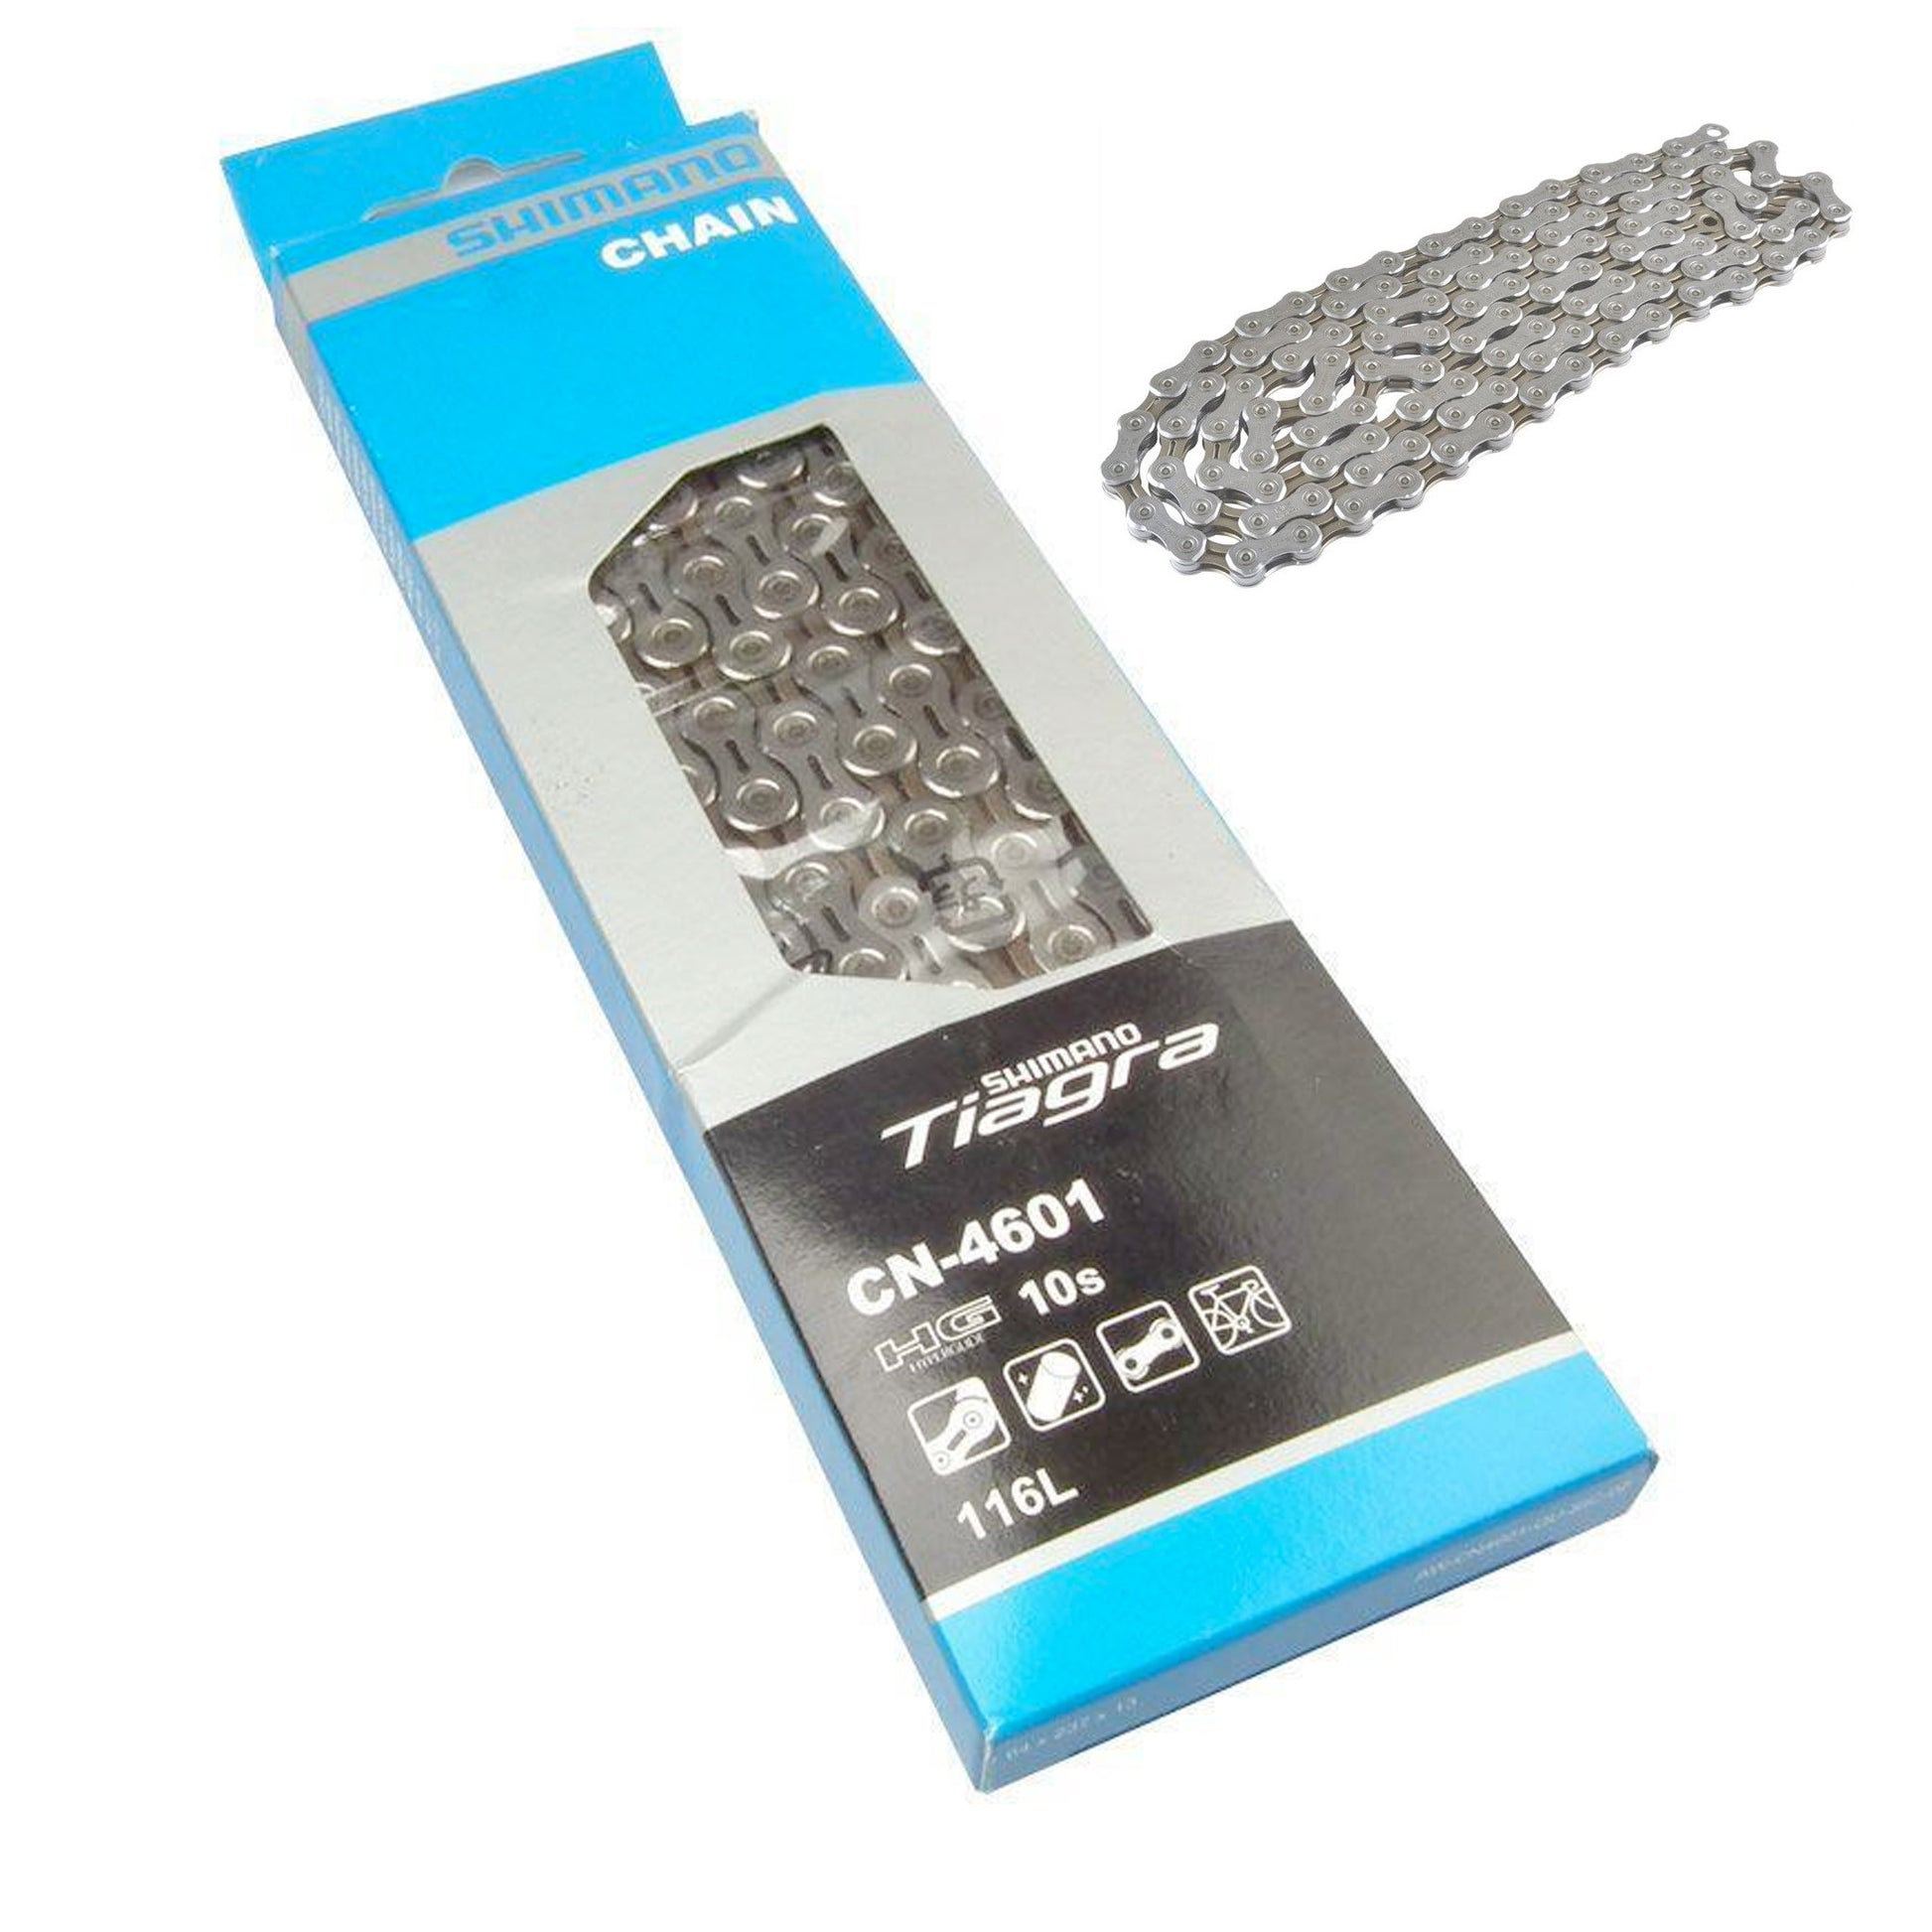 Shimano Tiagra CN-4601 116 Link 10 Speed Chain - Silver buy at Woolys Wheels Sydney